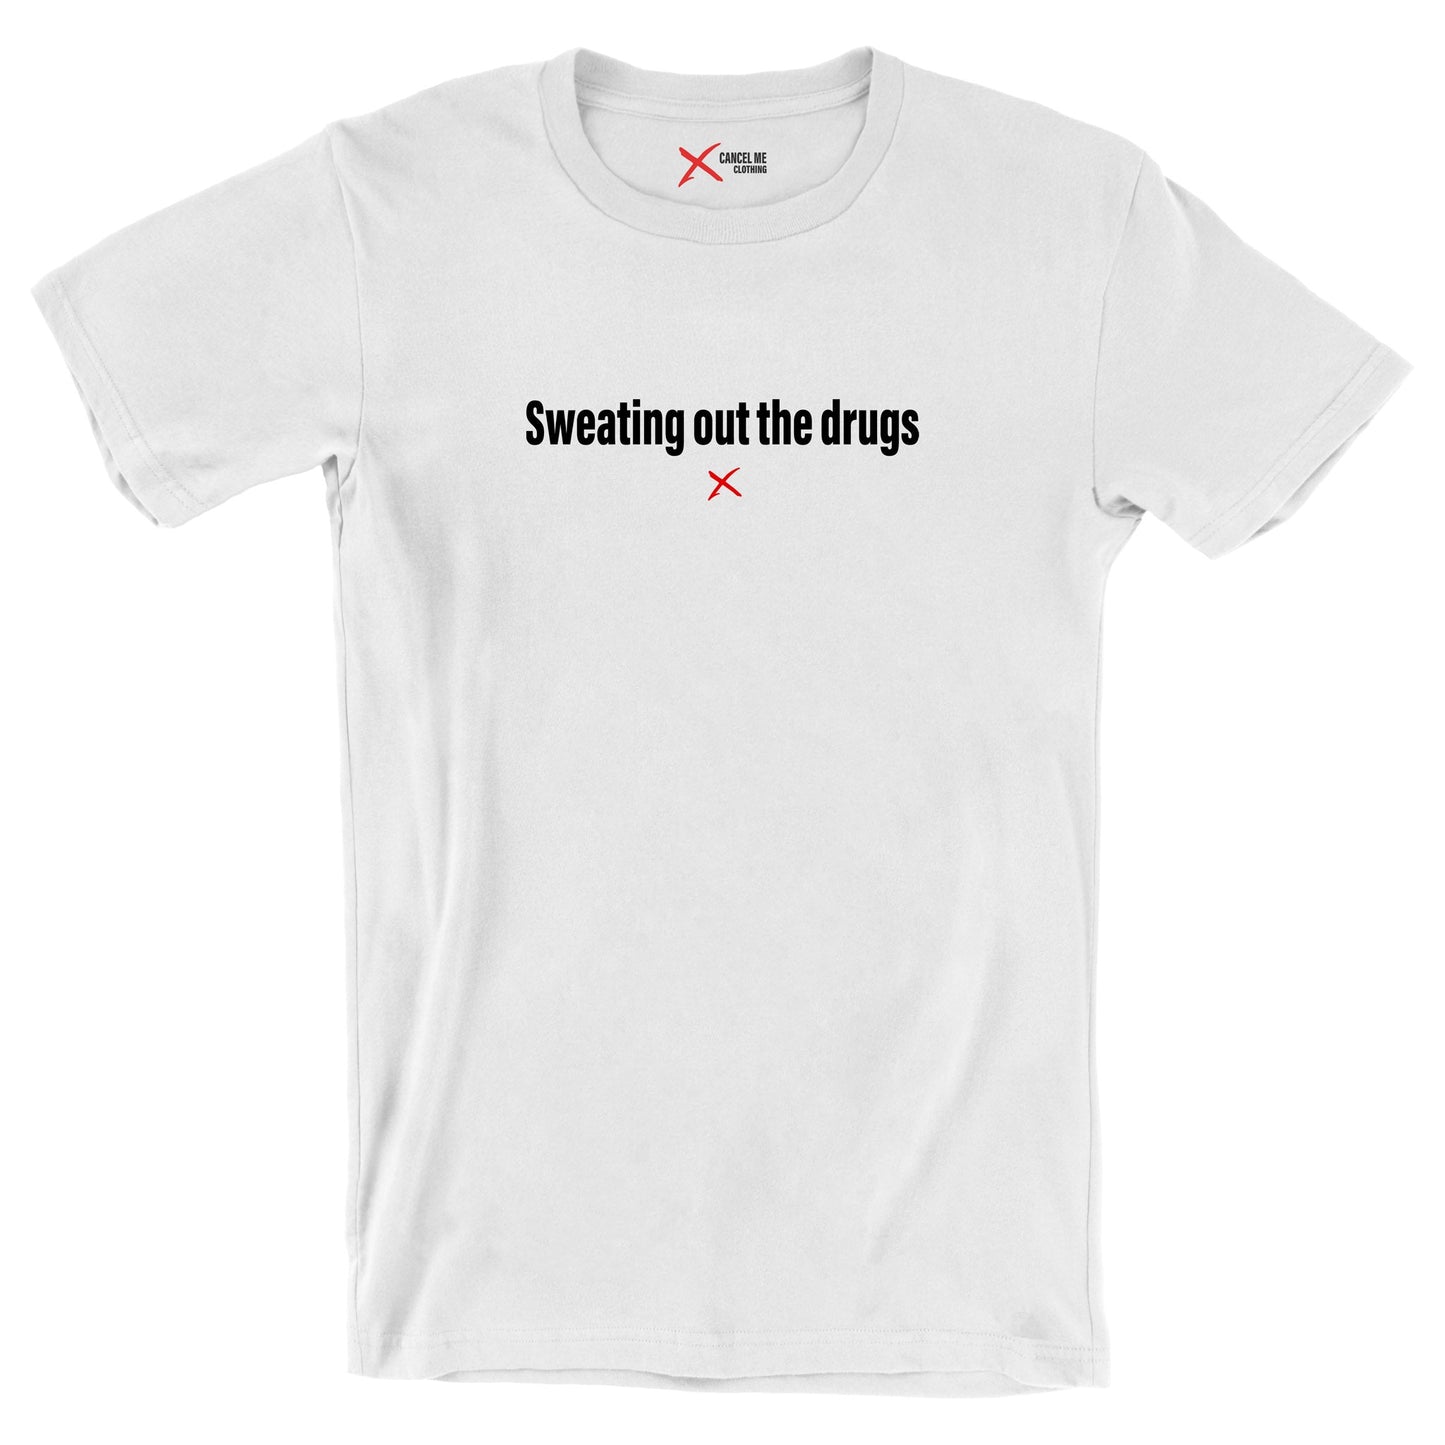 Sweating out the drugs - Shirt